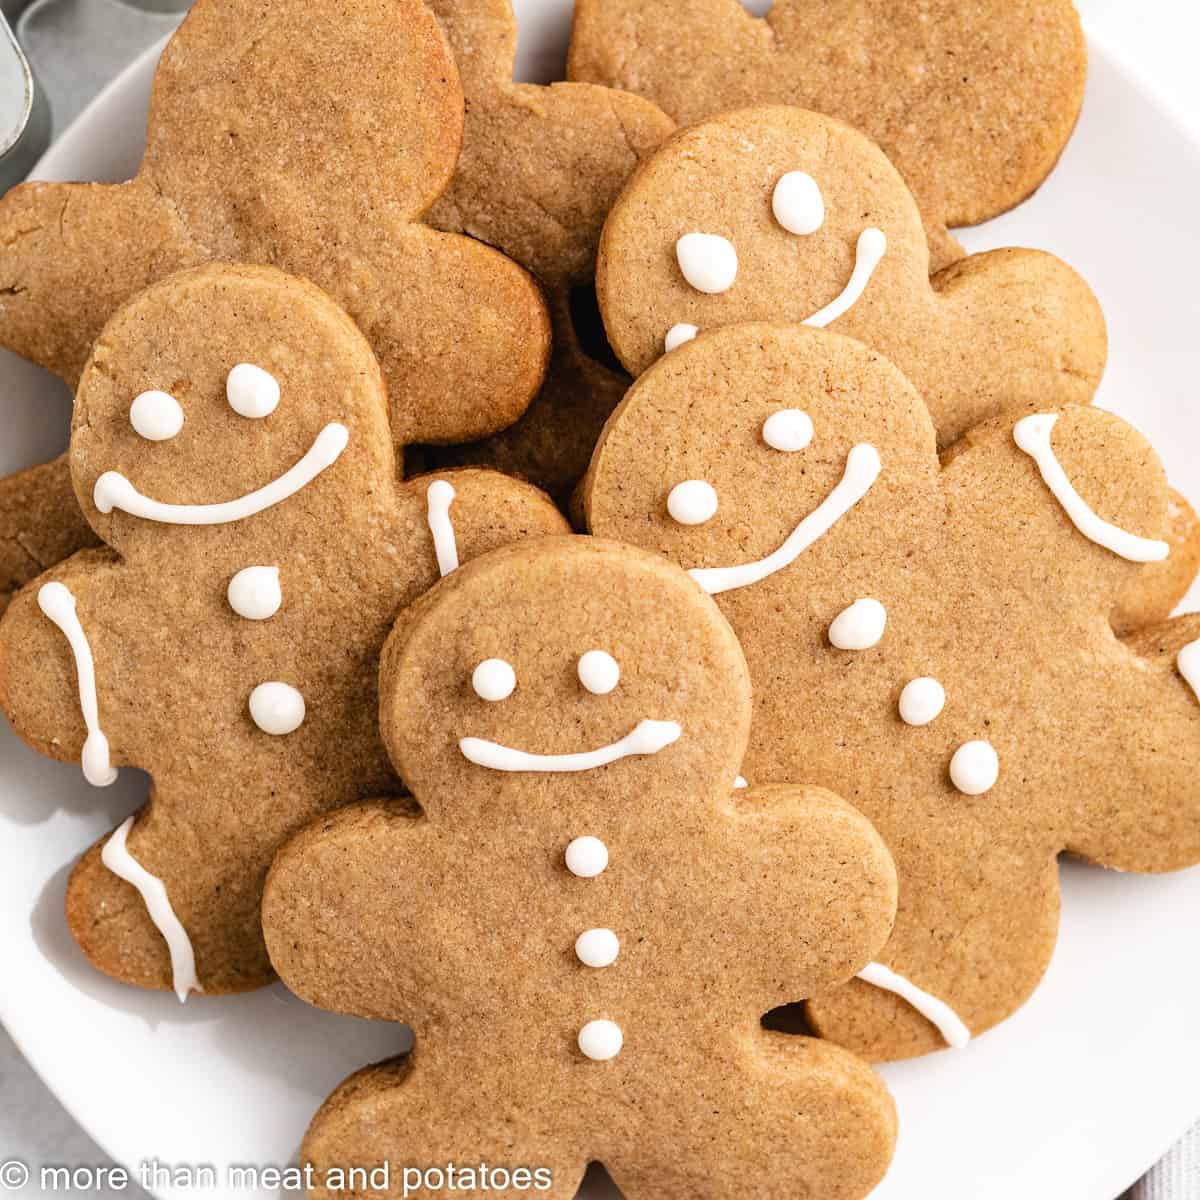 soft gingerbread cookie recipe with molasses